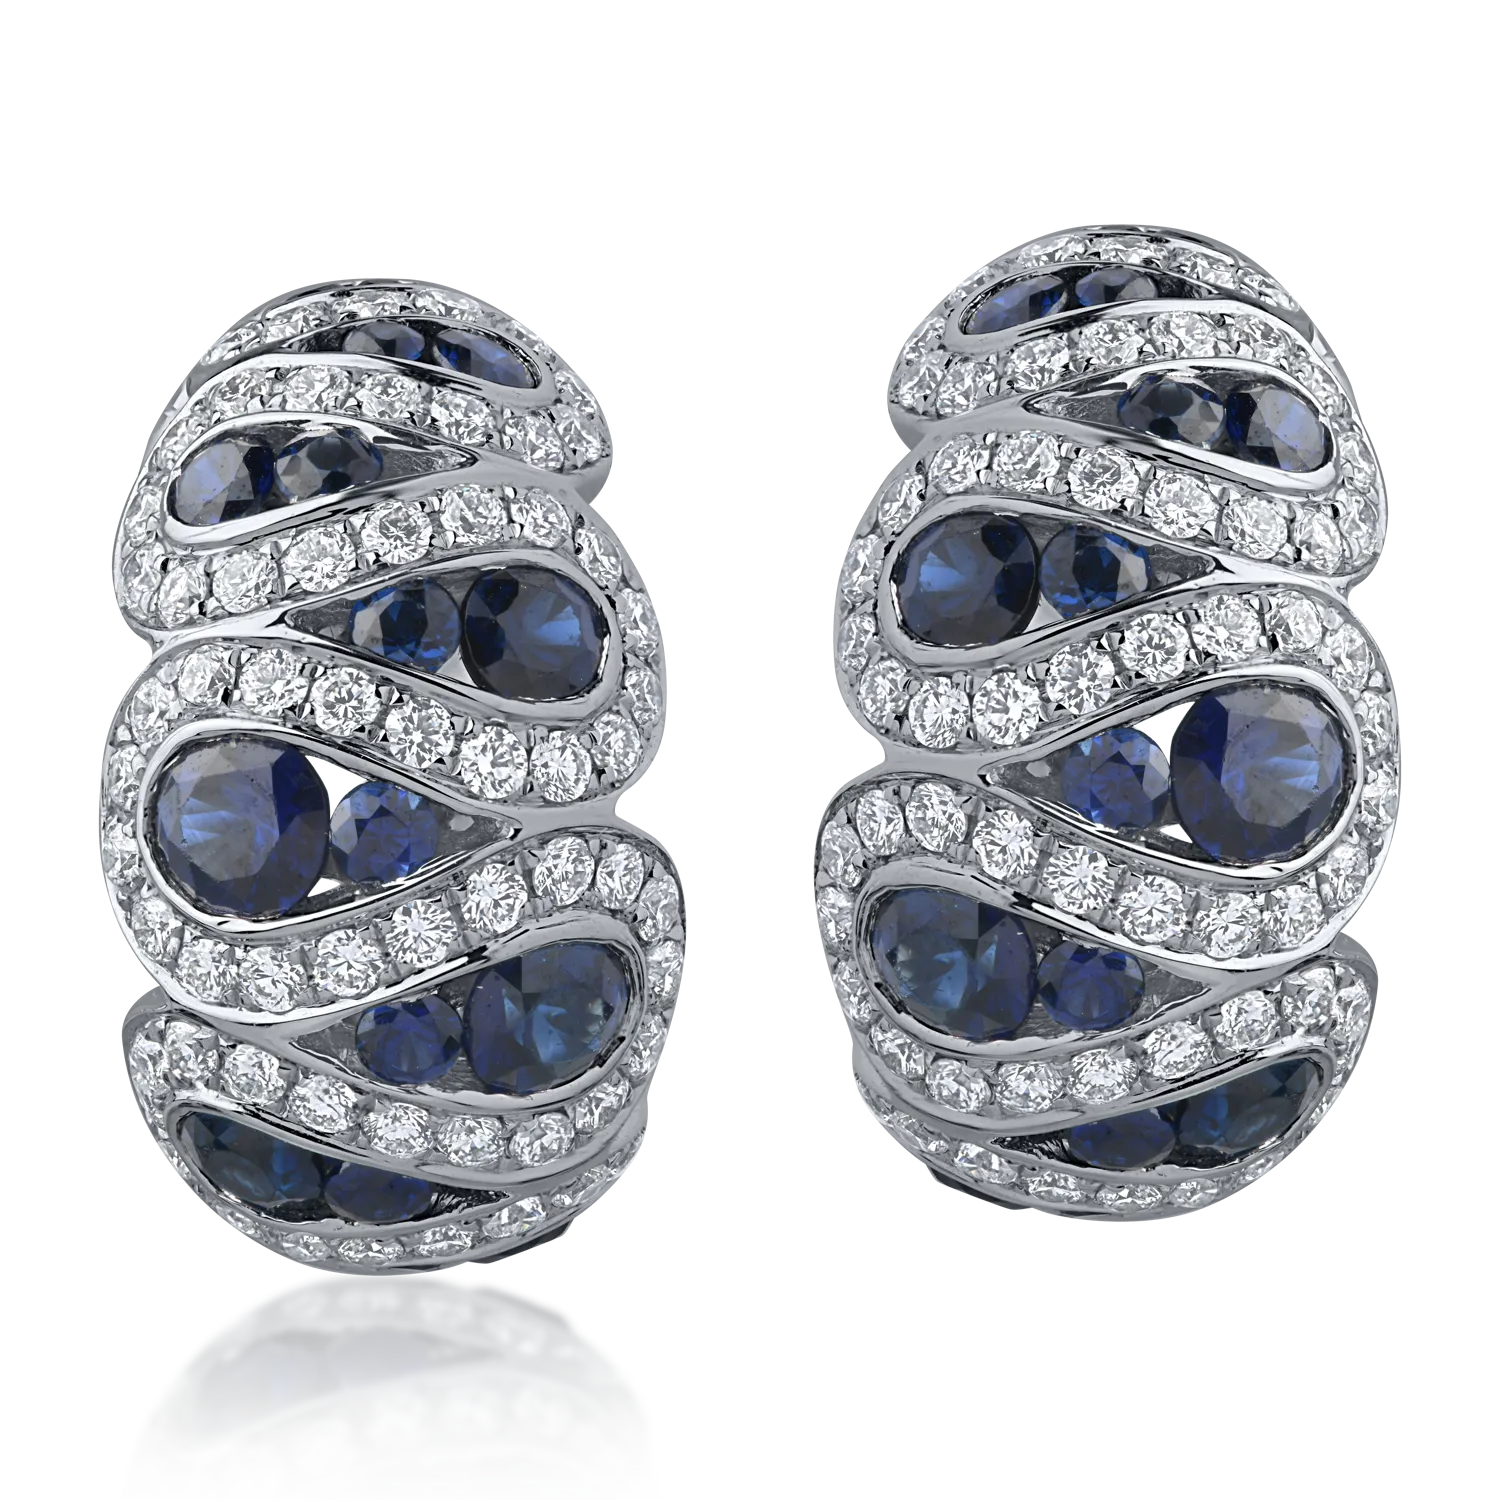 White gold earrings with 2.09ct blue sapphires and 1.05ct diamonds